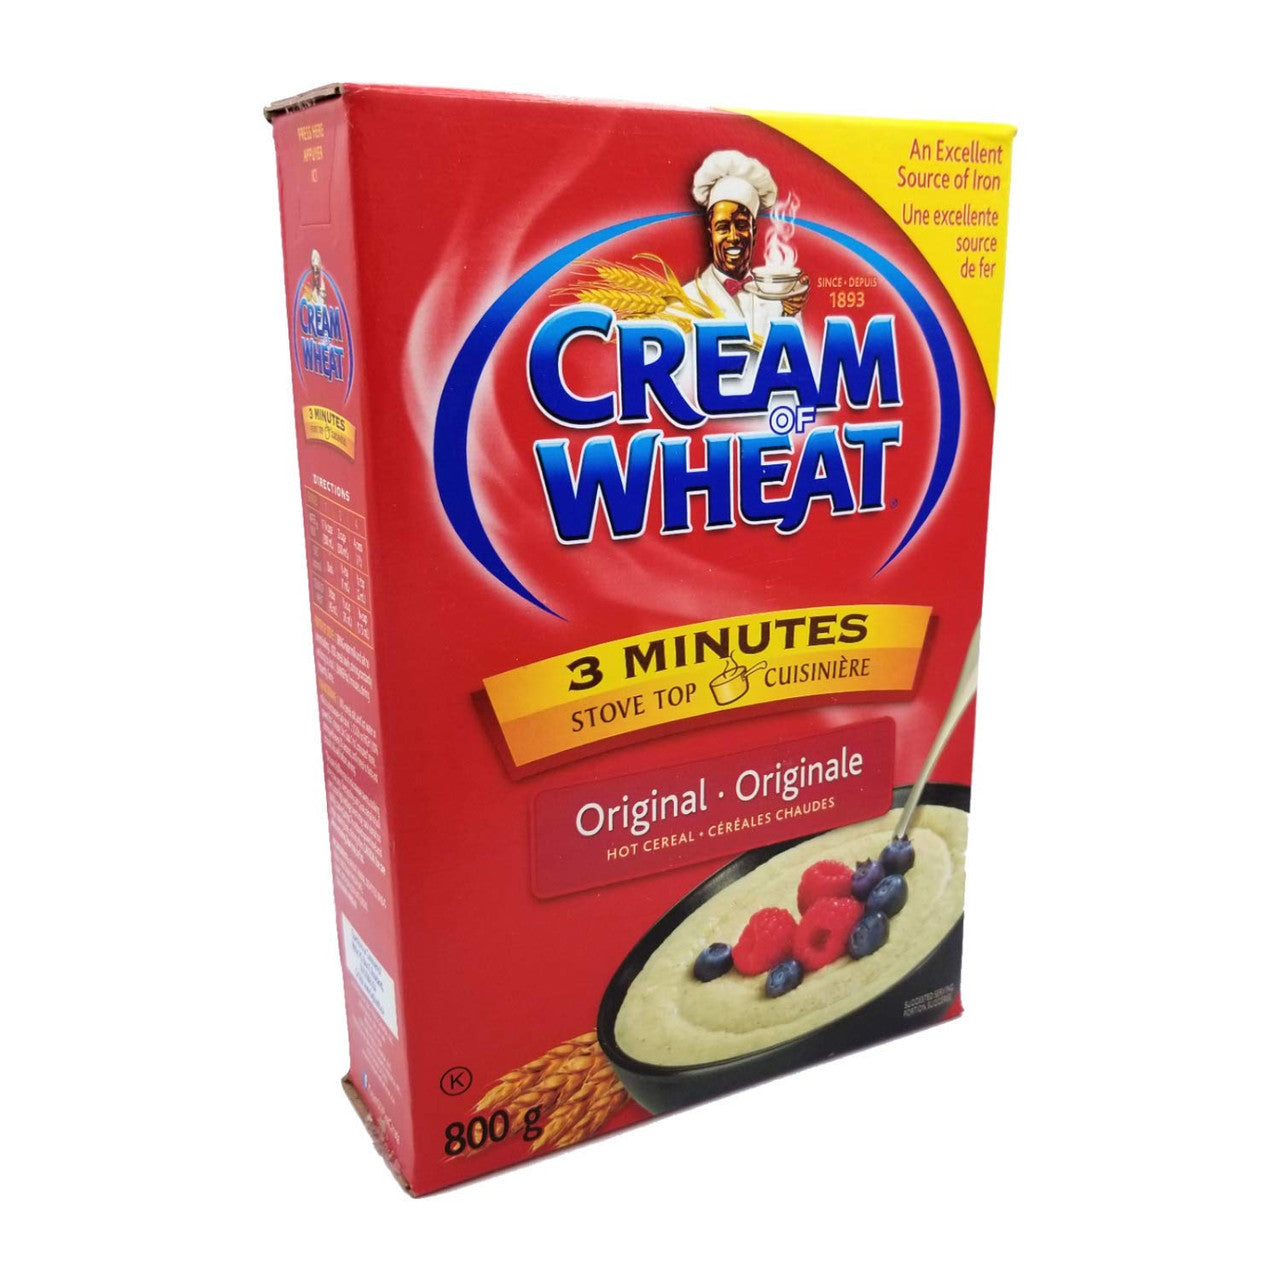 Cream of Wheat Original Flavour Hot Cereal, 800g/1.8 lbs, Pack of 2, {Imported from Canada}